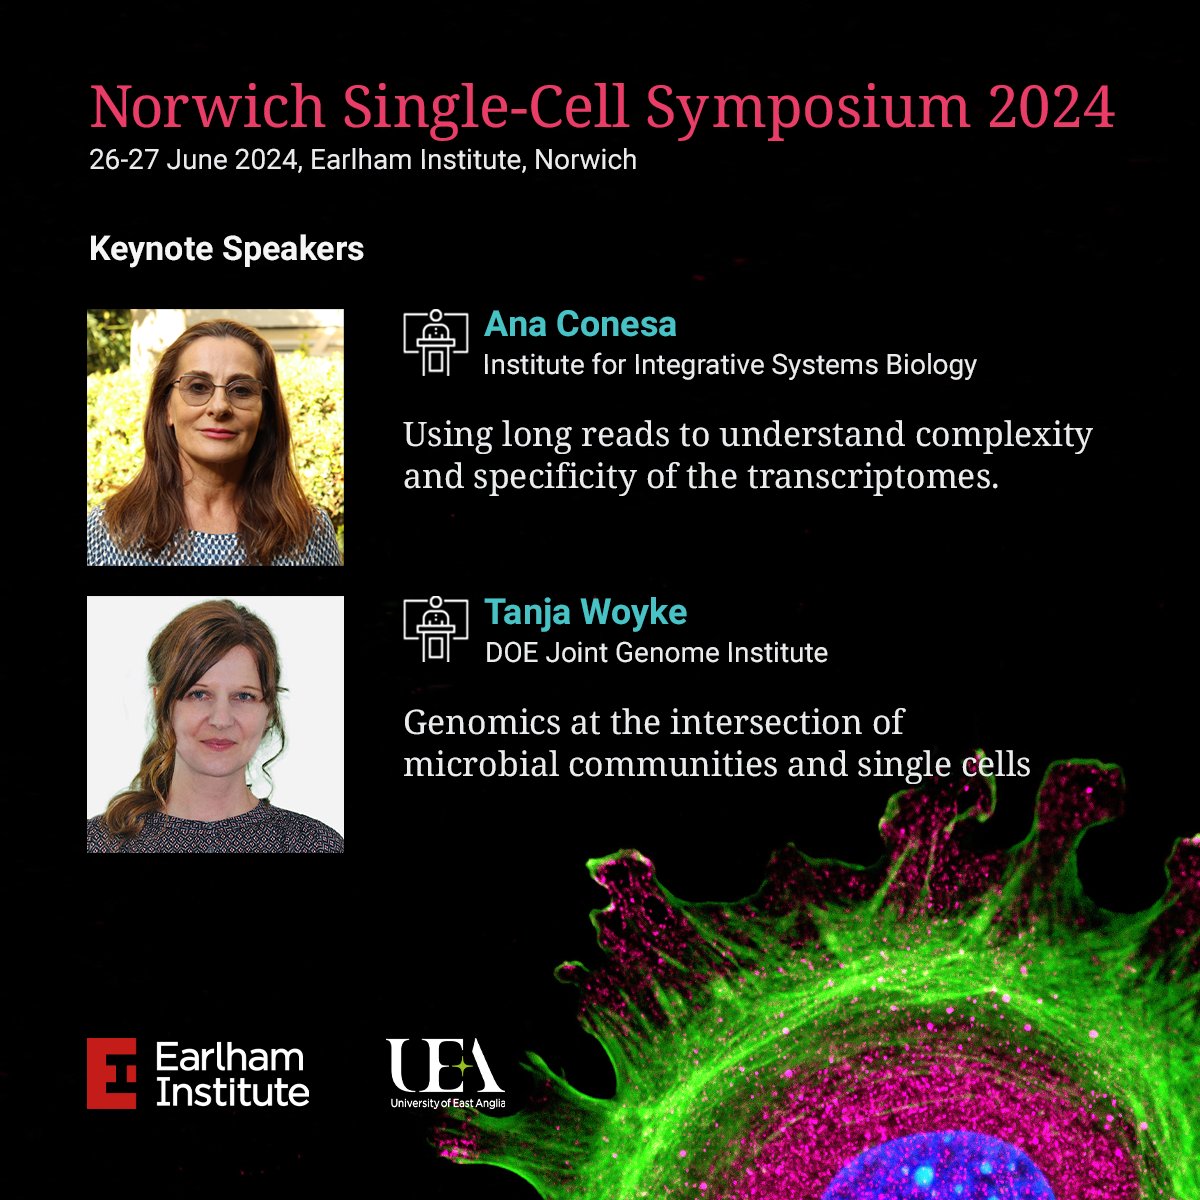 Take a look at our amazing speakers for this year's Norwich #SingleCell Symposium! They'll be discussing their latest research and applications across the single-cell and #spatial field. #EISingleCell24 Registration closes soon! ➡️ okt.to/oE3ILU